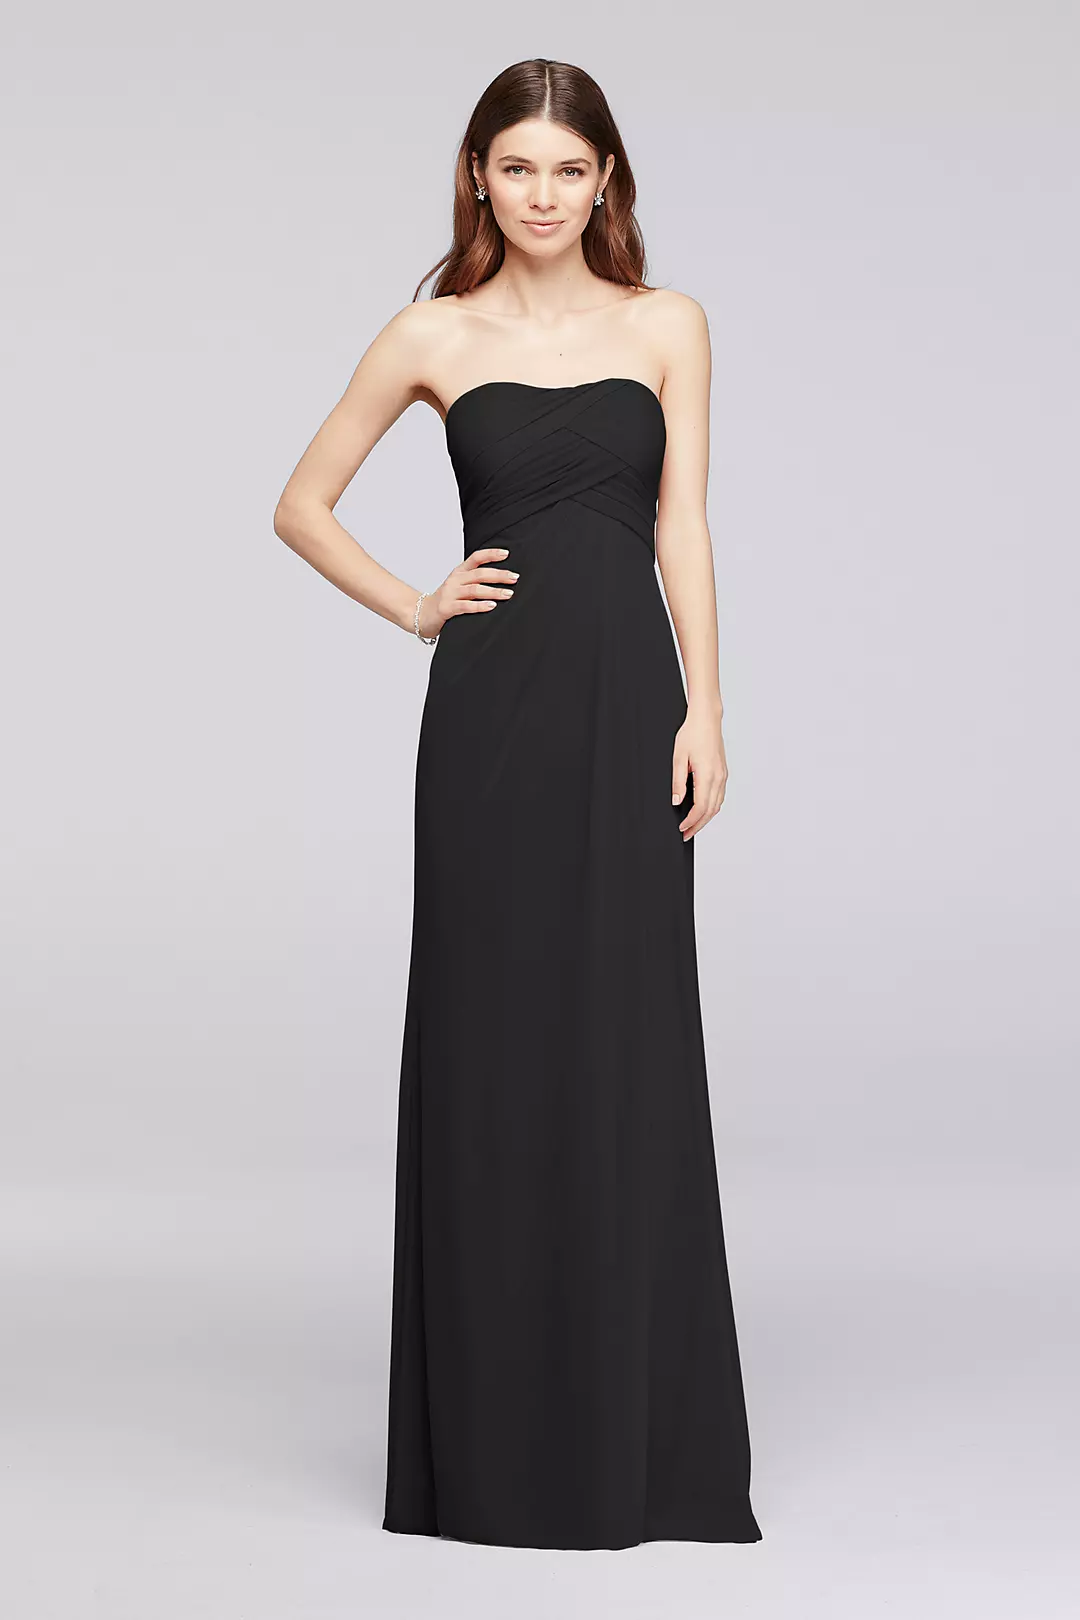 Mesh Strapless Long Bridesmaid Dress with Pleats Image